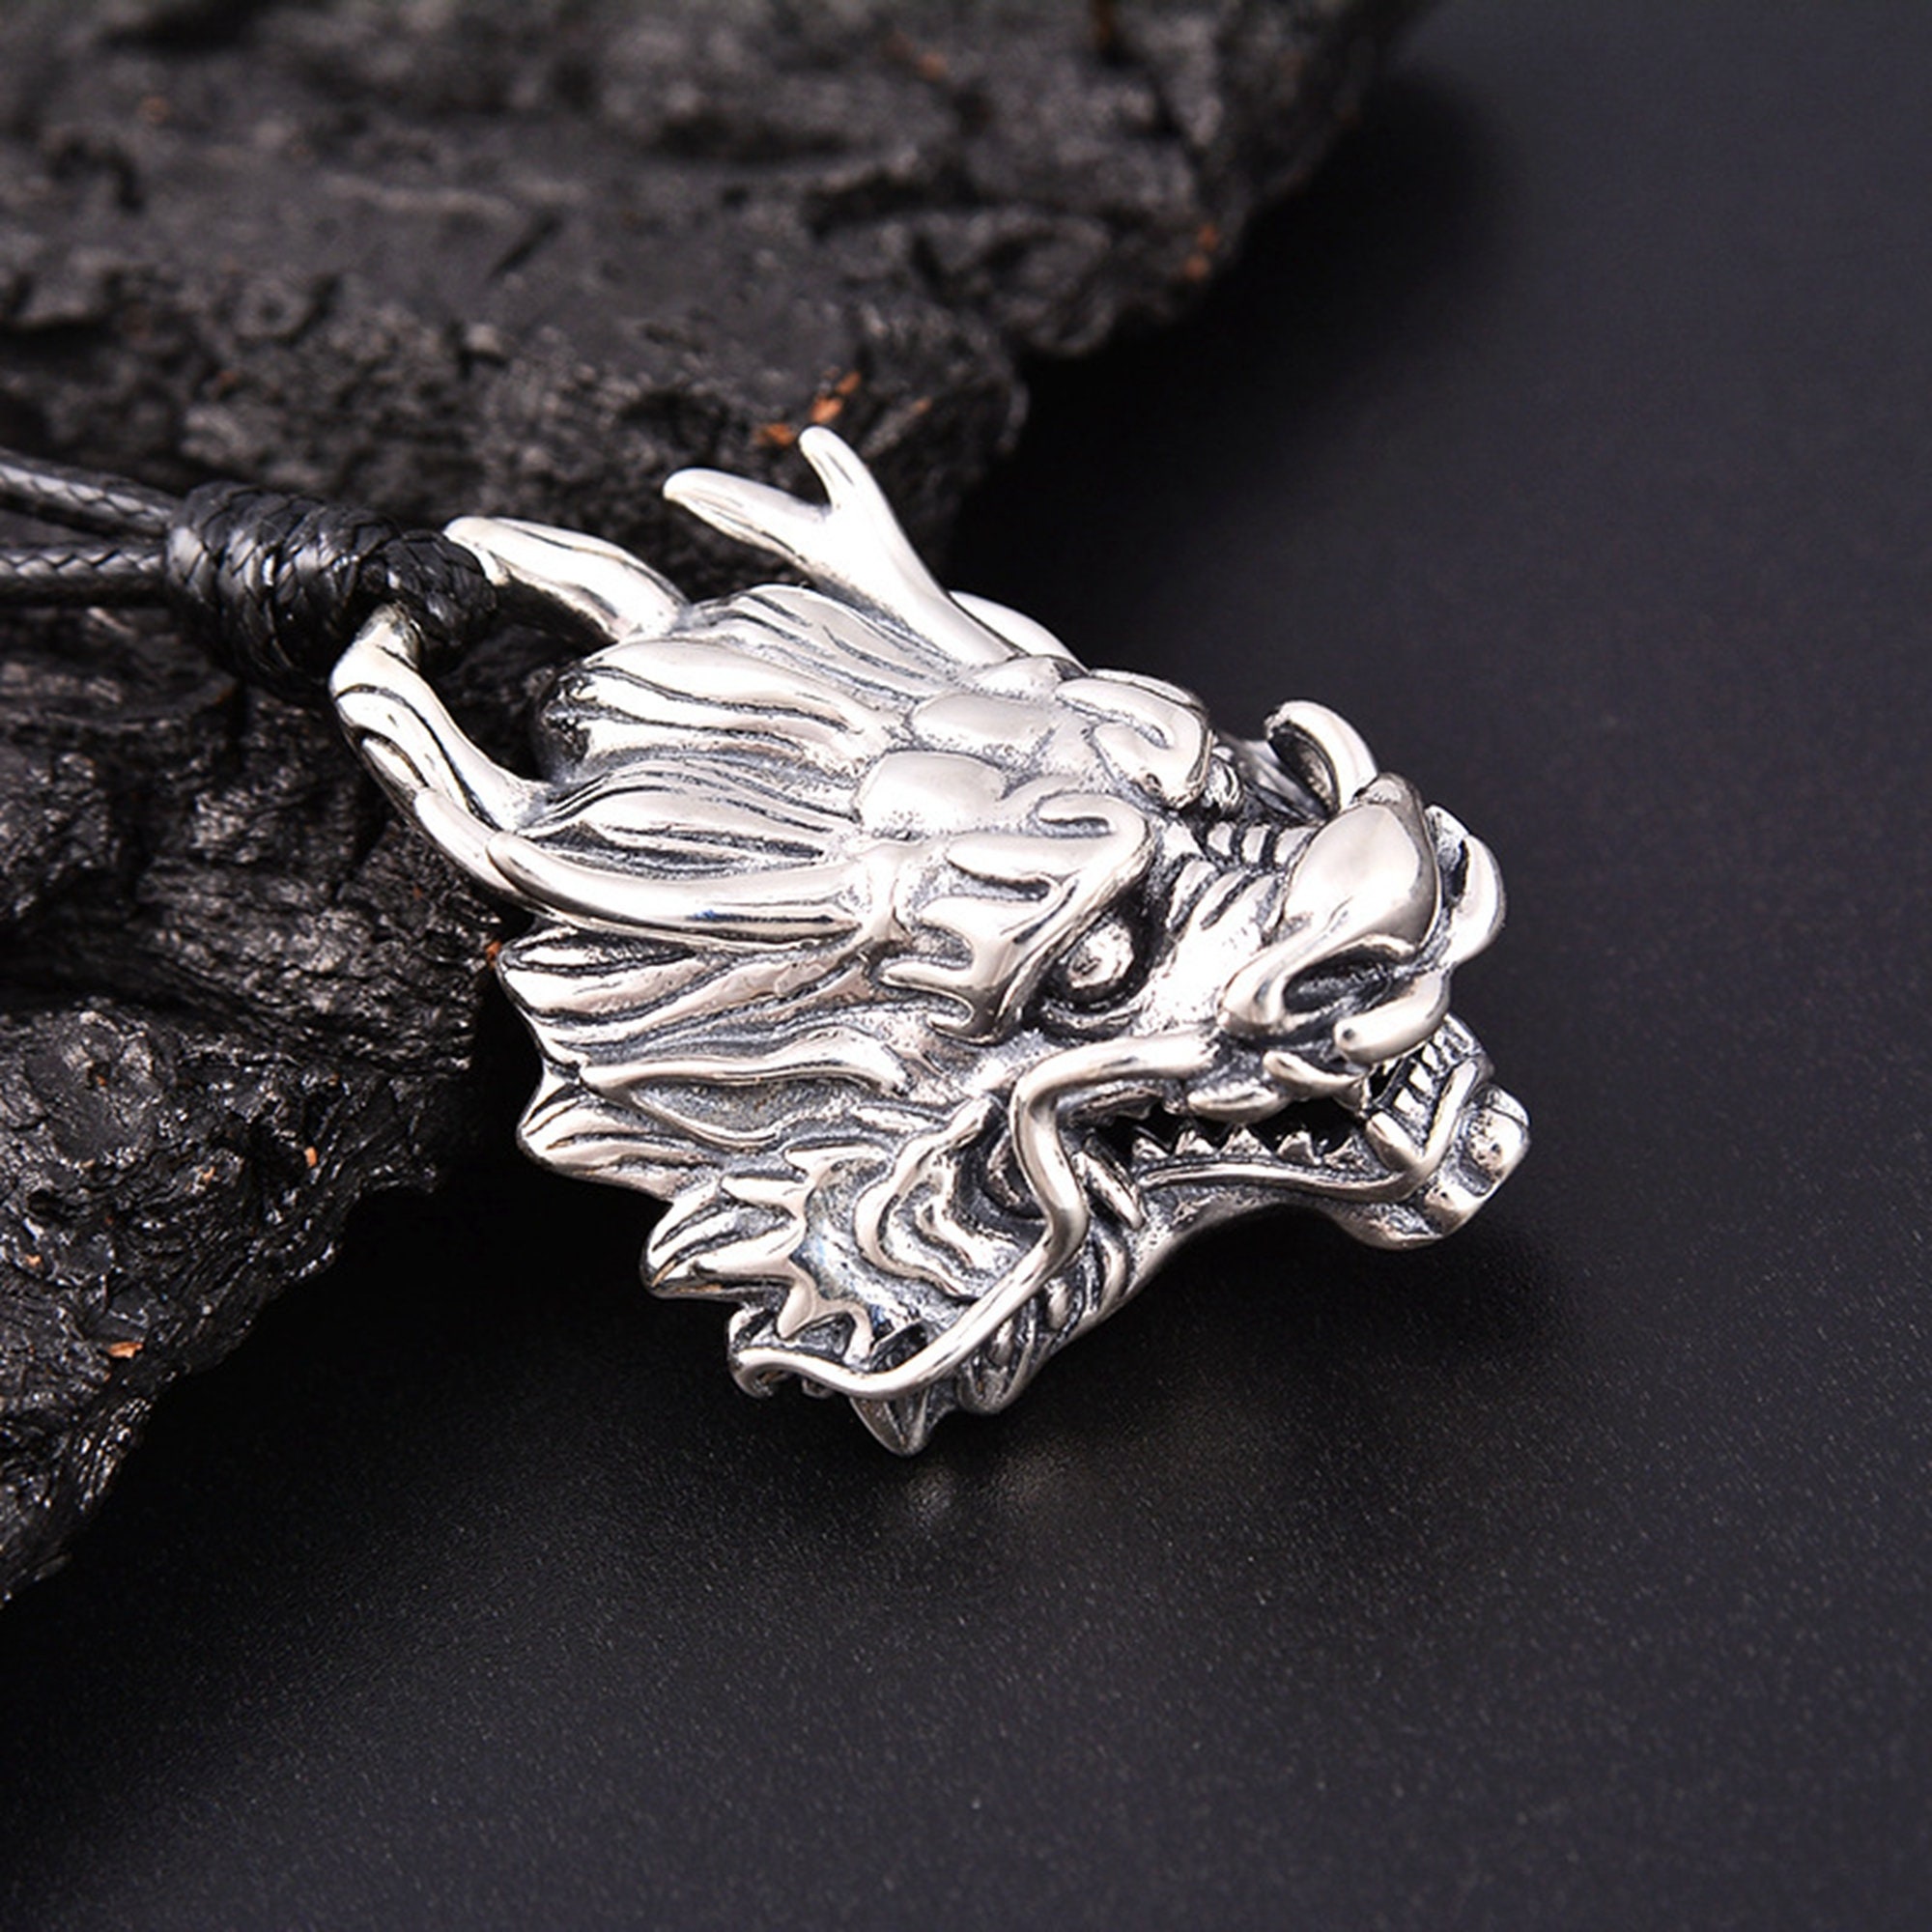 100g (20pcs) Craft Supplies Mixed Flying Dragon Charms Pendants Beads Charms